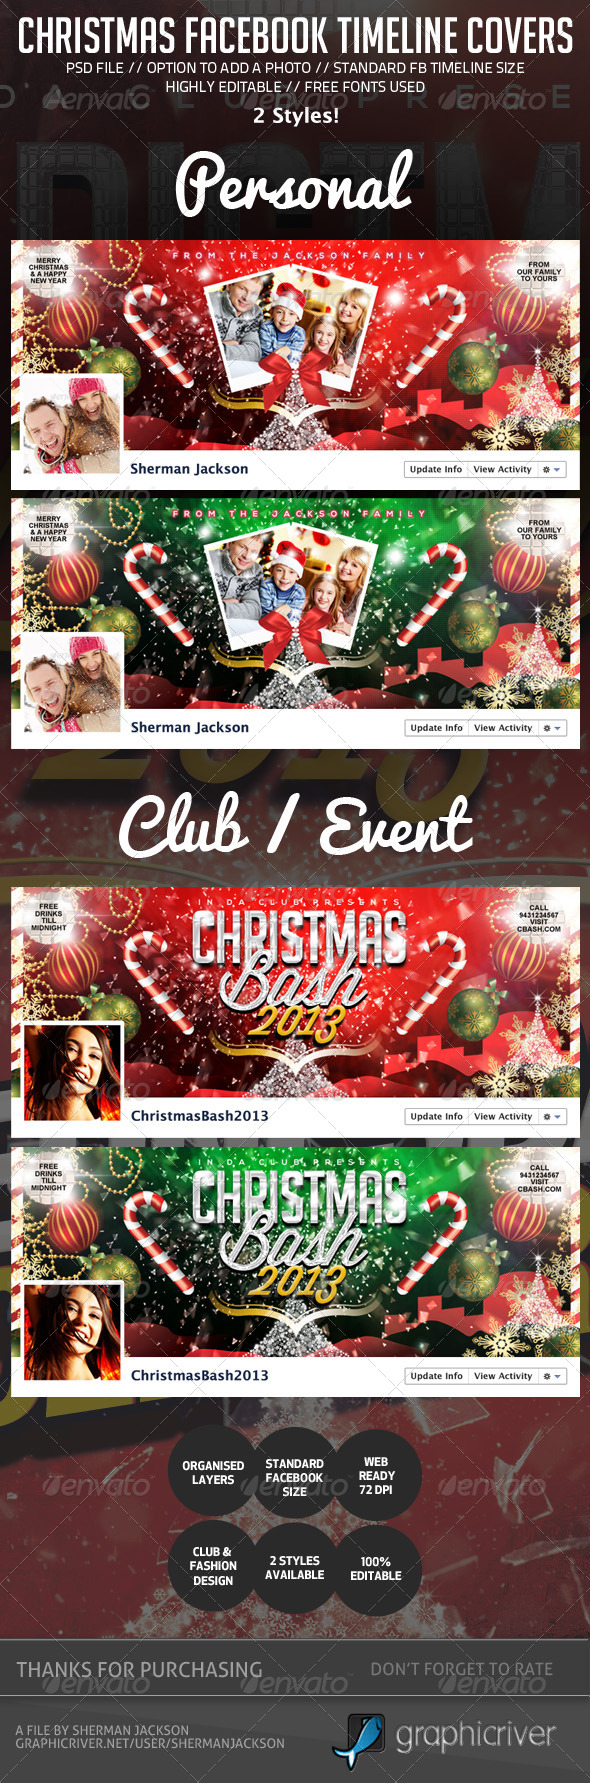 Christmas/Holiday Facebook Timeline Cover (Facebook Timeline Covers)